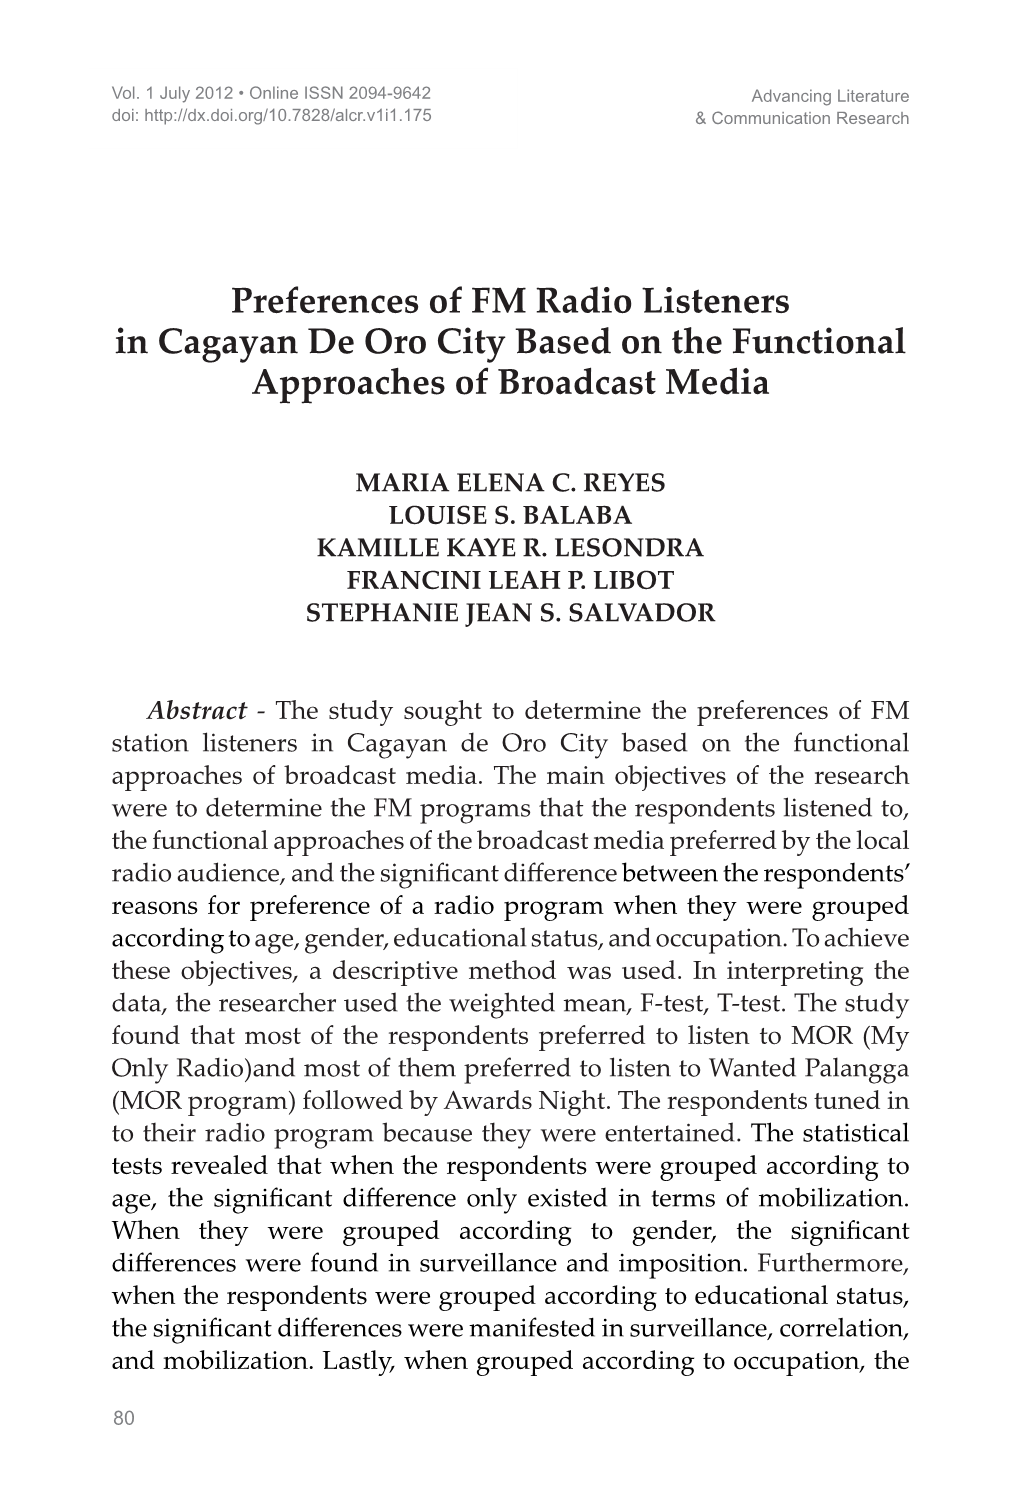 Preferences of FM Radio Listeners in Cagayan De Oro City Based on the Functional Approaches of Broadcast Media